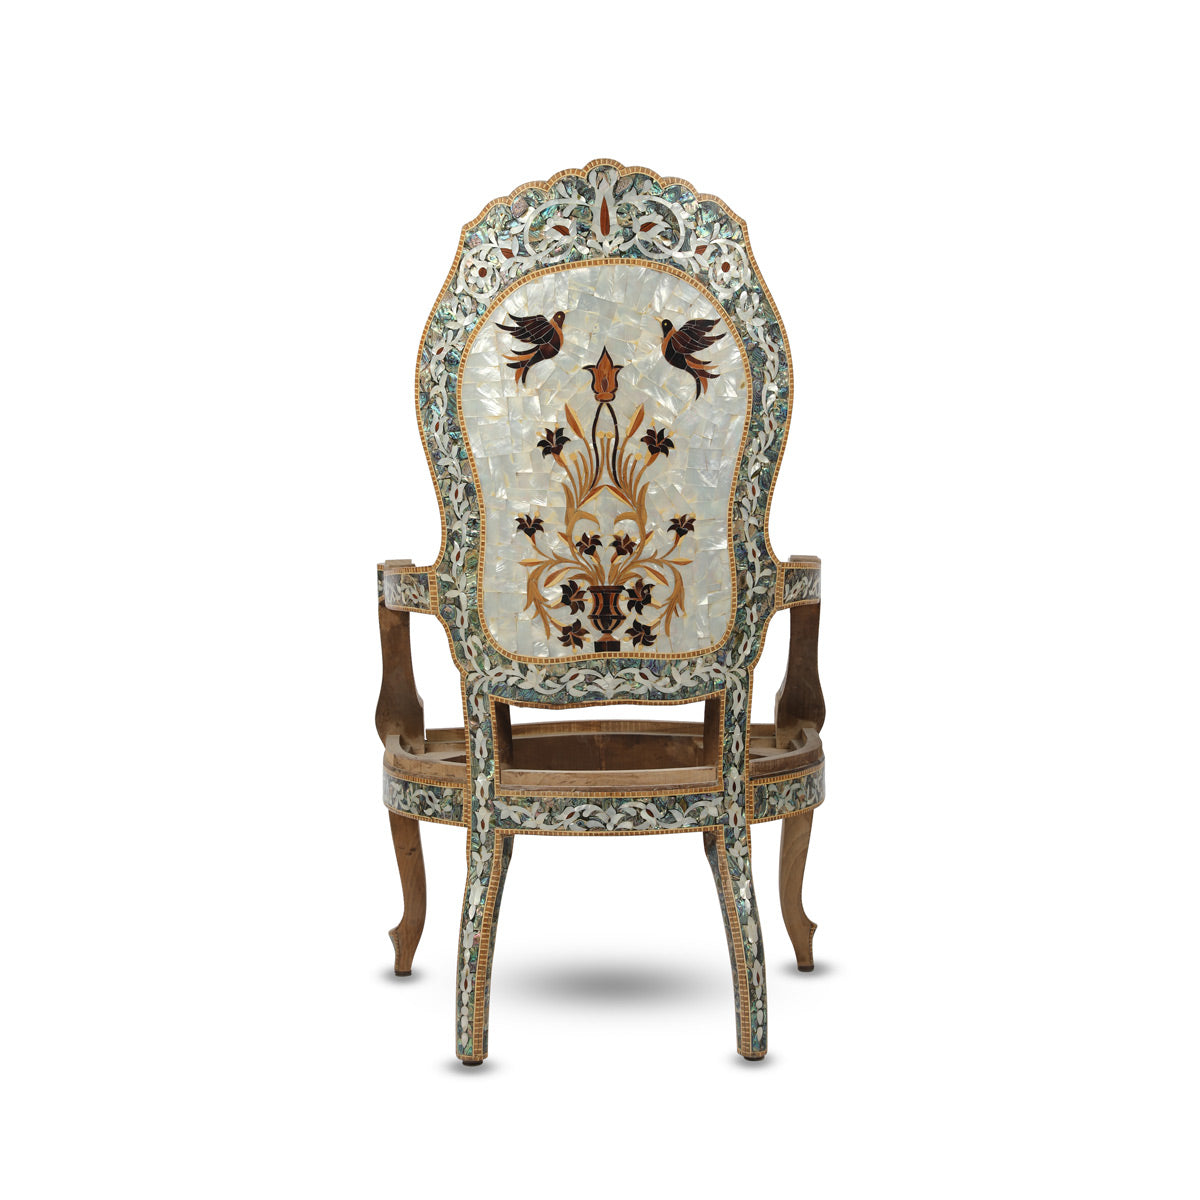 Back View of Solid Artistic Single Seater Sofa Showcasing Exquisite Bird & Tulip Patterns Inlaid